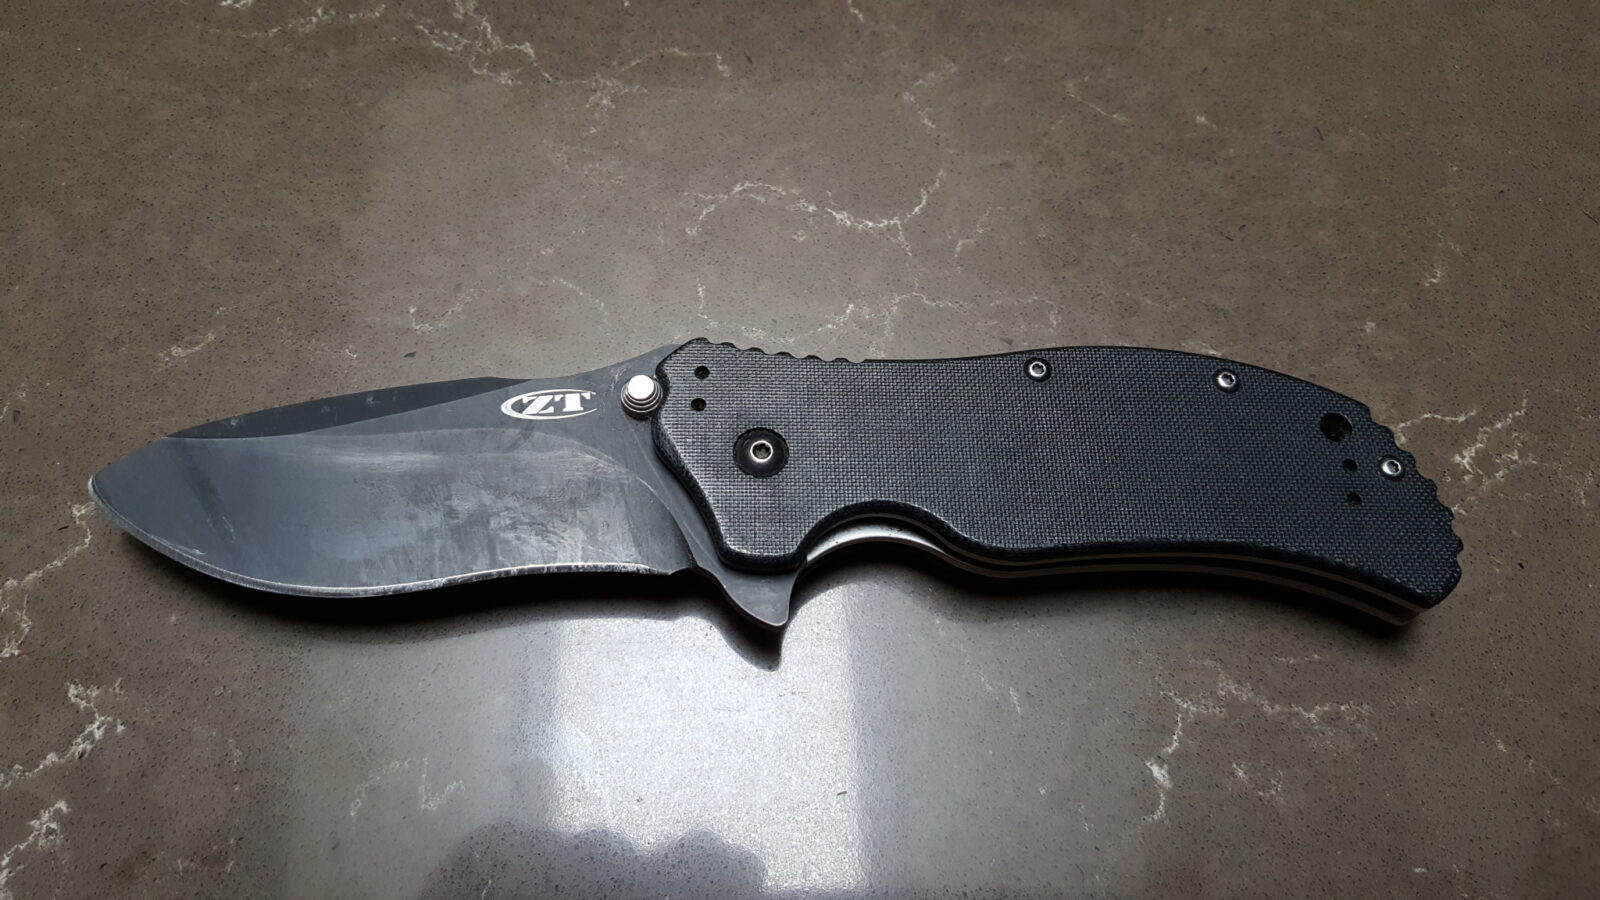 April 2017 - My EDC Knife is a ZT 0350BW - Ronin's Grips